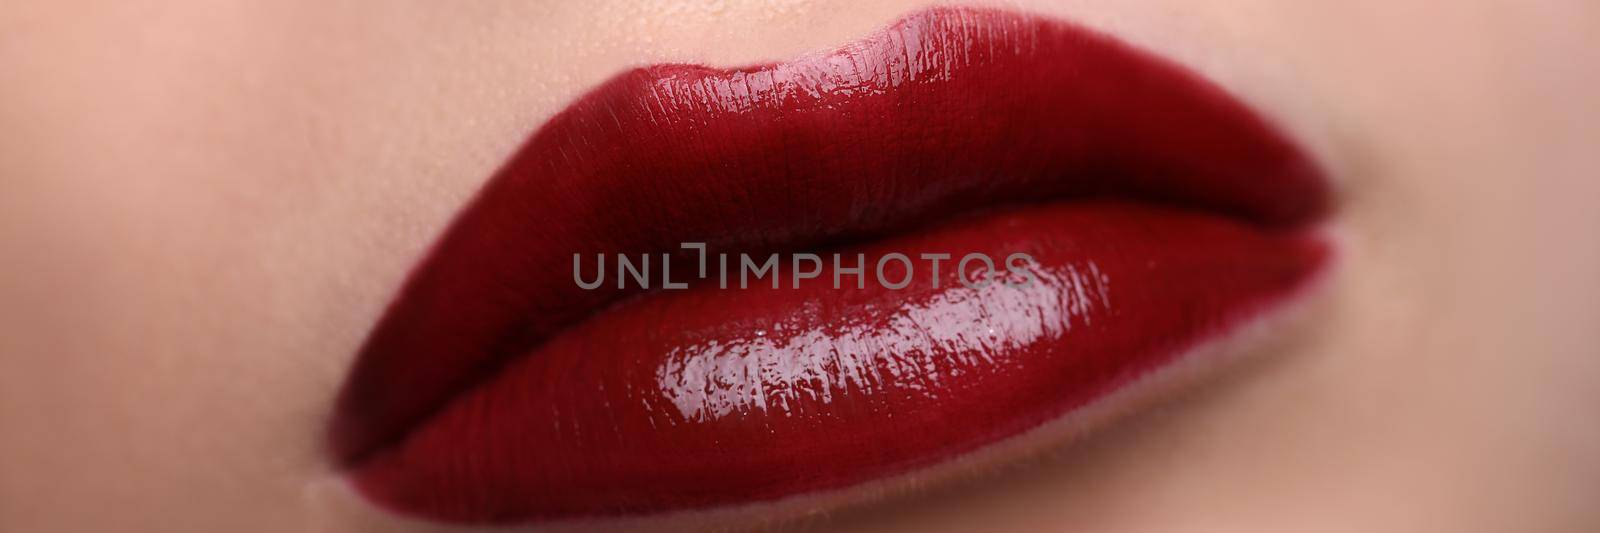 Closeup of beautiful female lips with red lipstick. Professional makeup concept